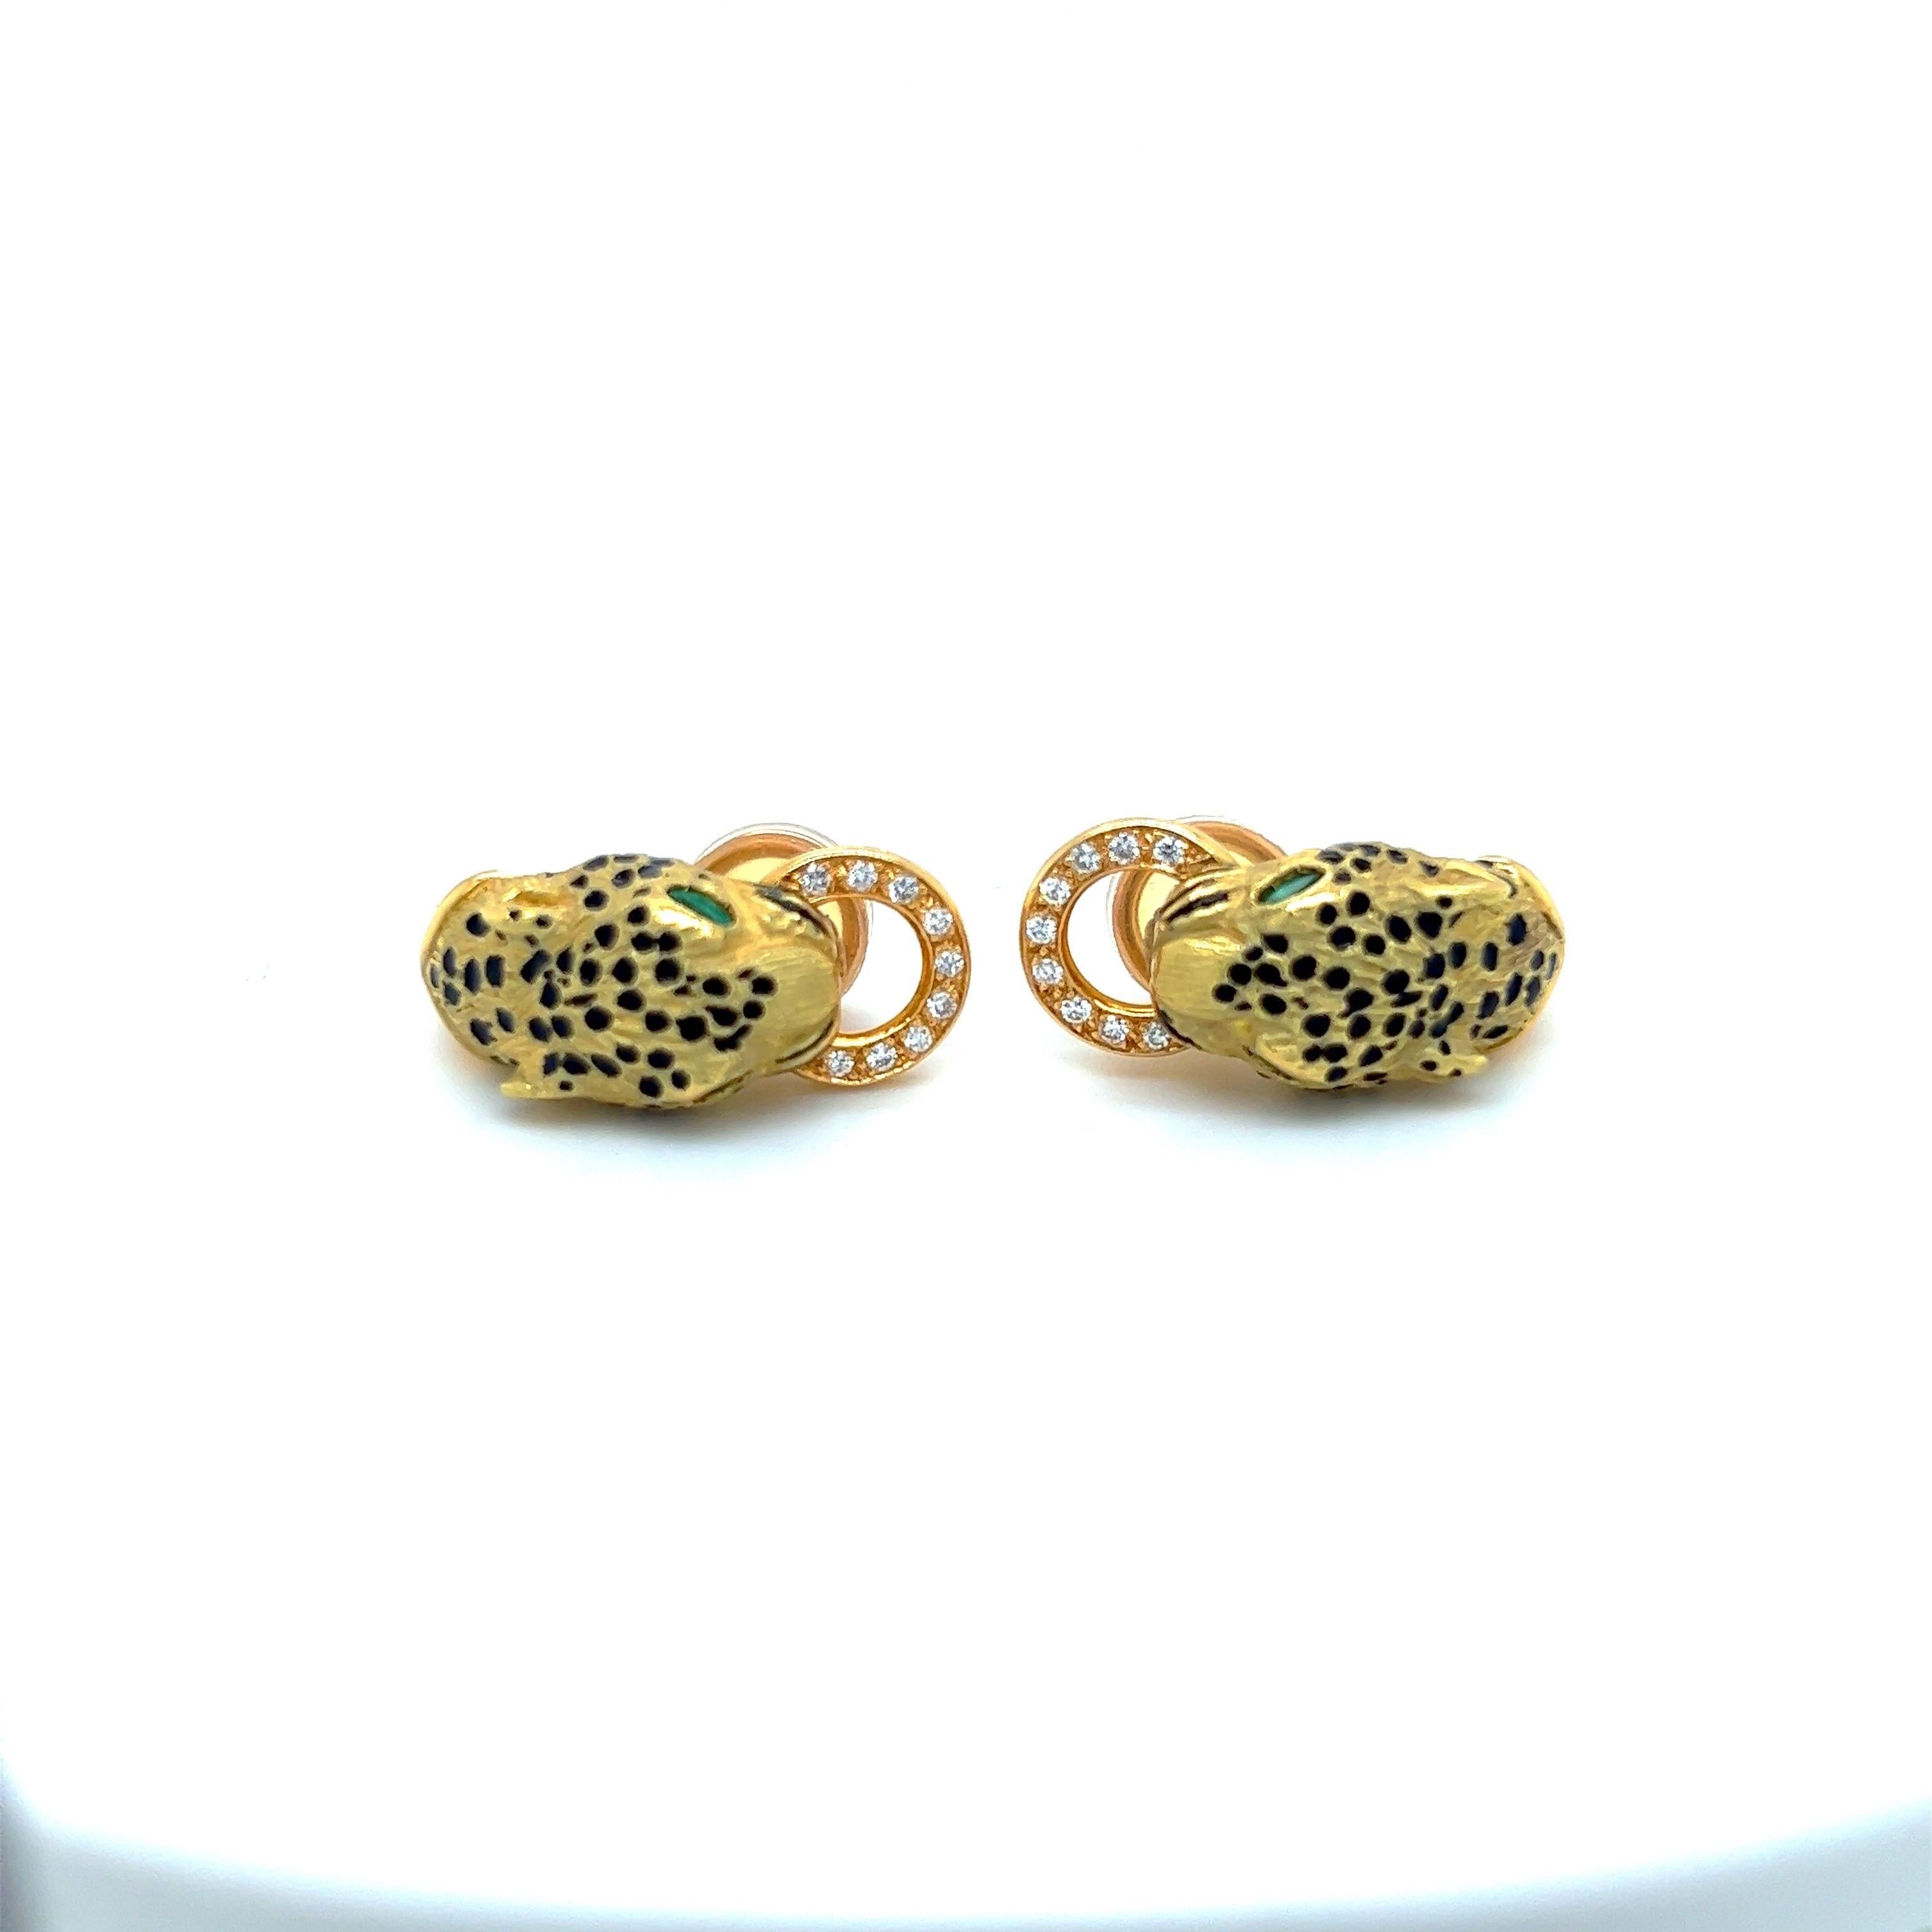 Beautiful 18 kt yellow gold Panther earrings. The earrings are designed with black enamel spots and set with marquise shaped emeralds as the eyes. The Panther holds a diamond ring in his mouth.
The earrings are clip on, but  posts may be